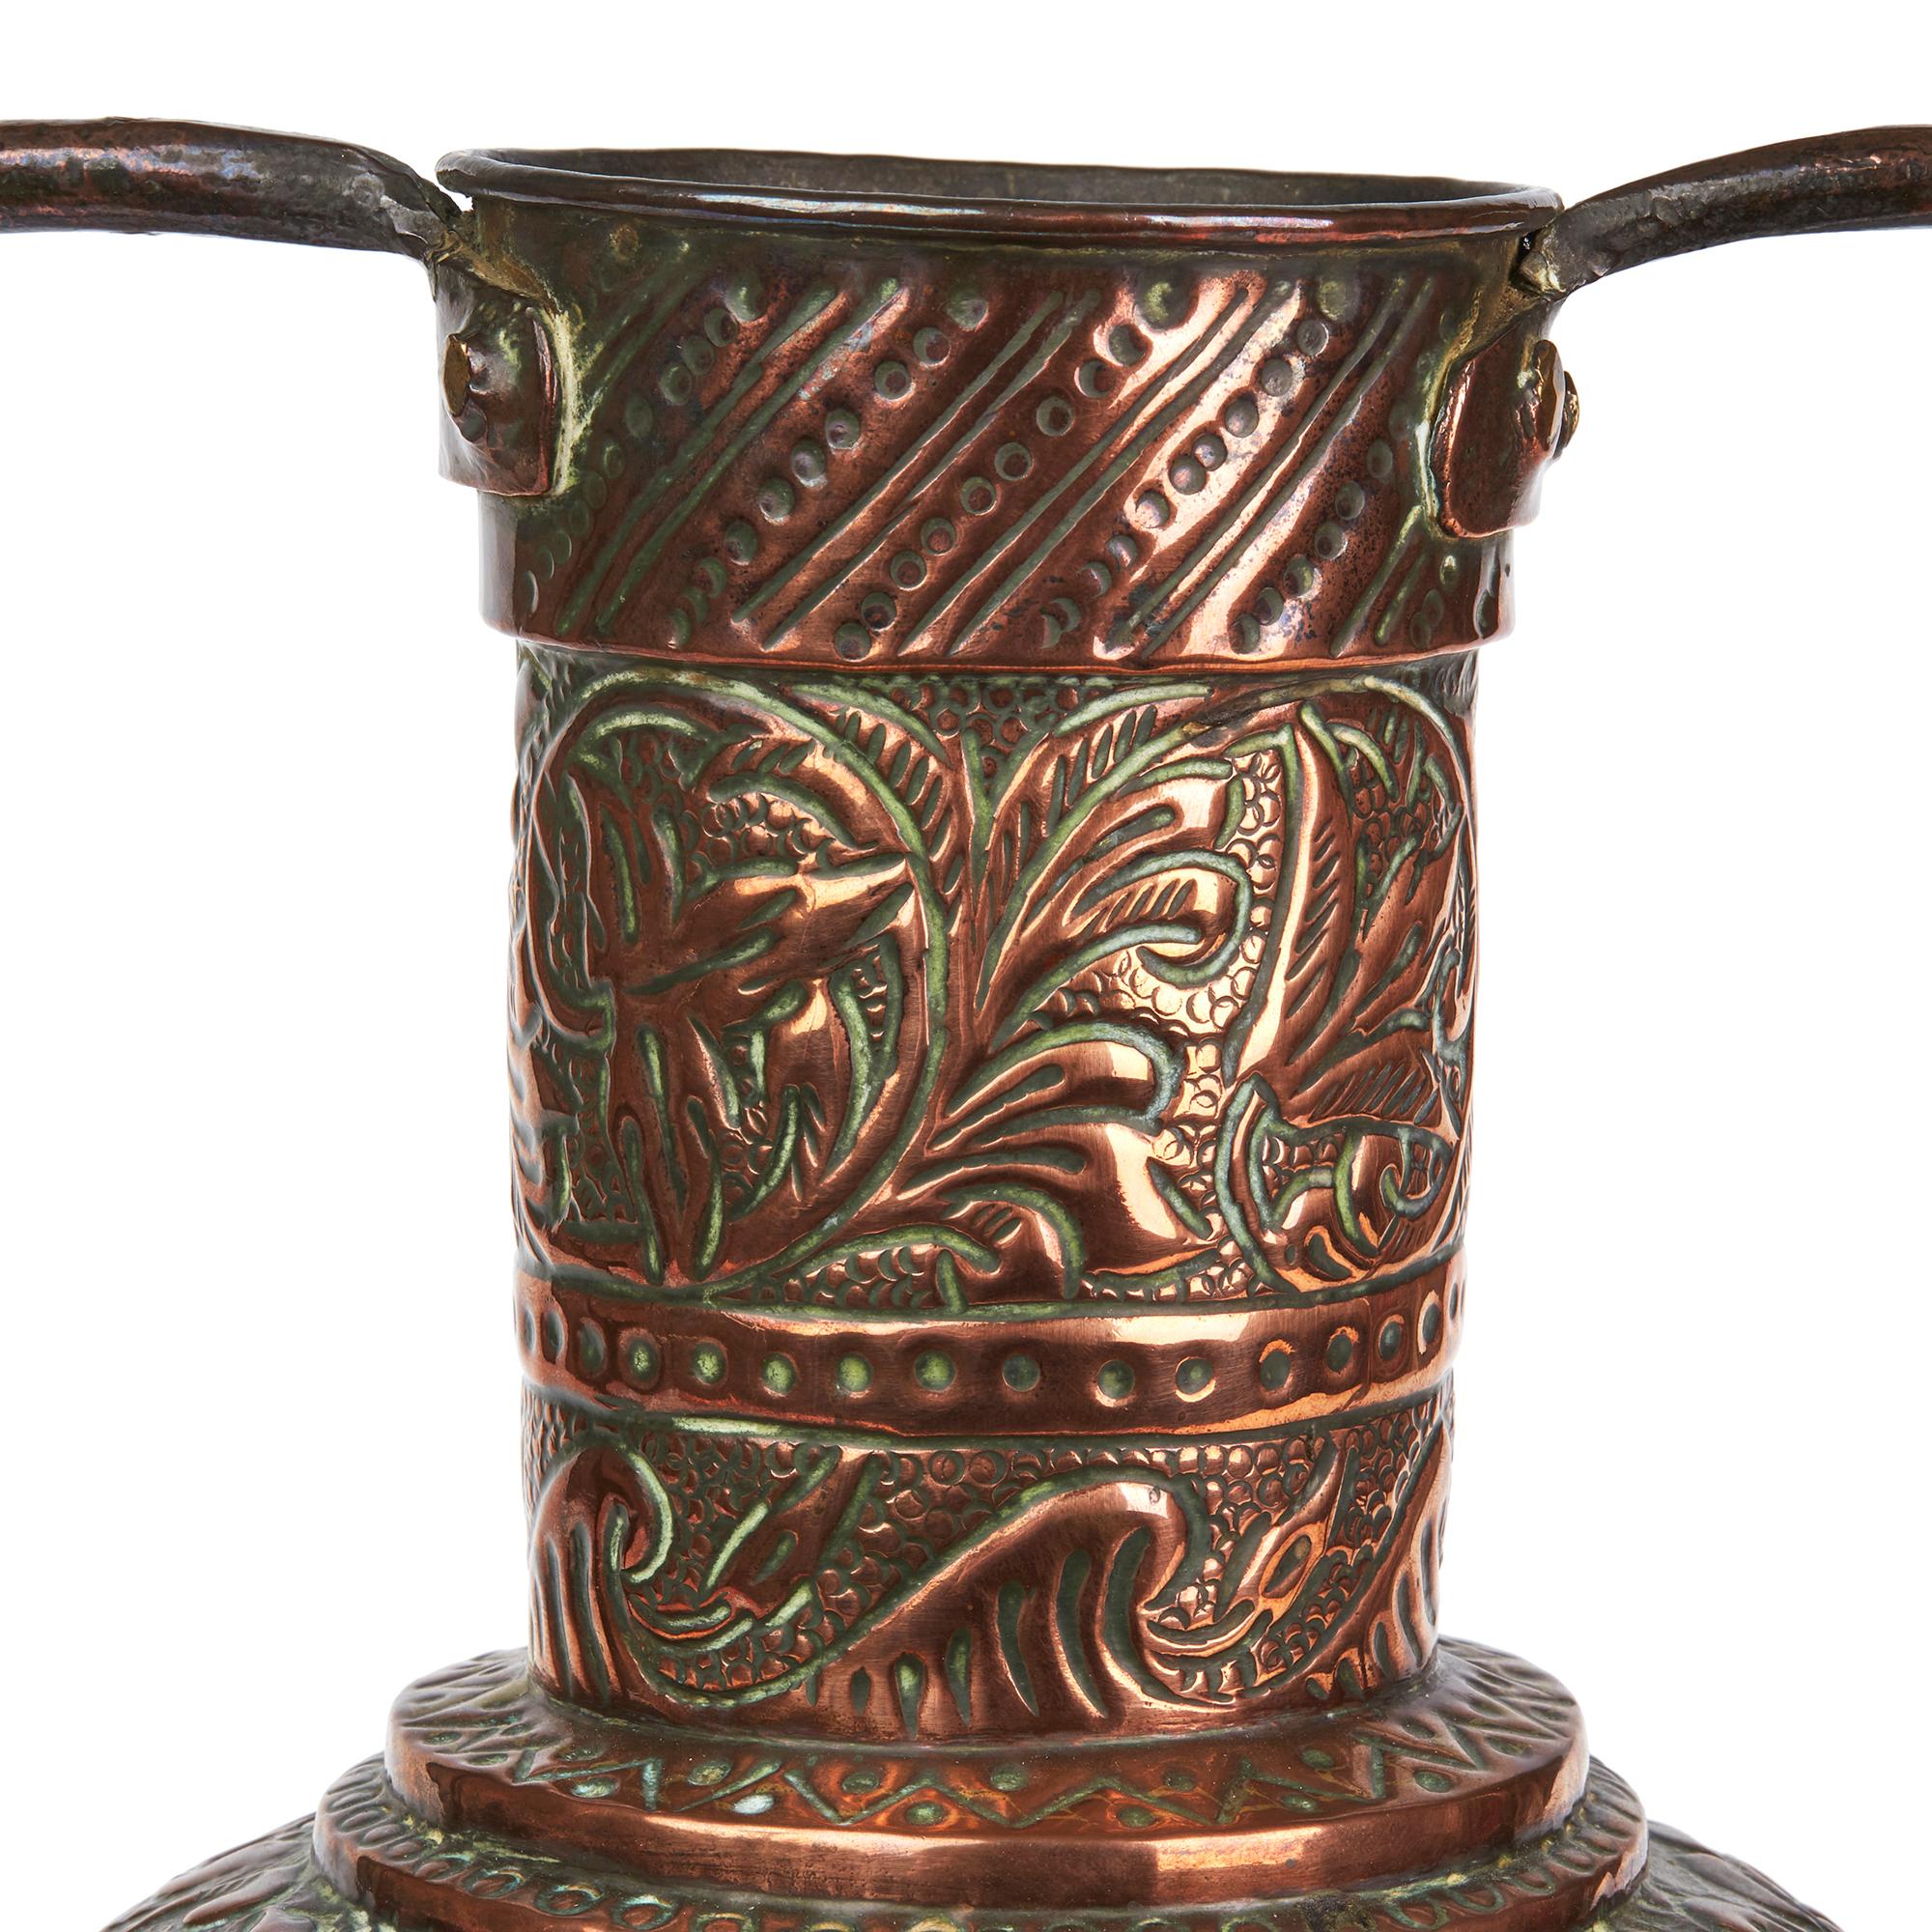 Indian Stylish Antique Asian Twin Handled Repousse Design Copper Vase 19th Century